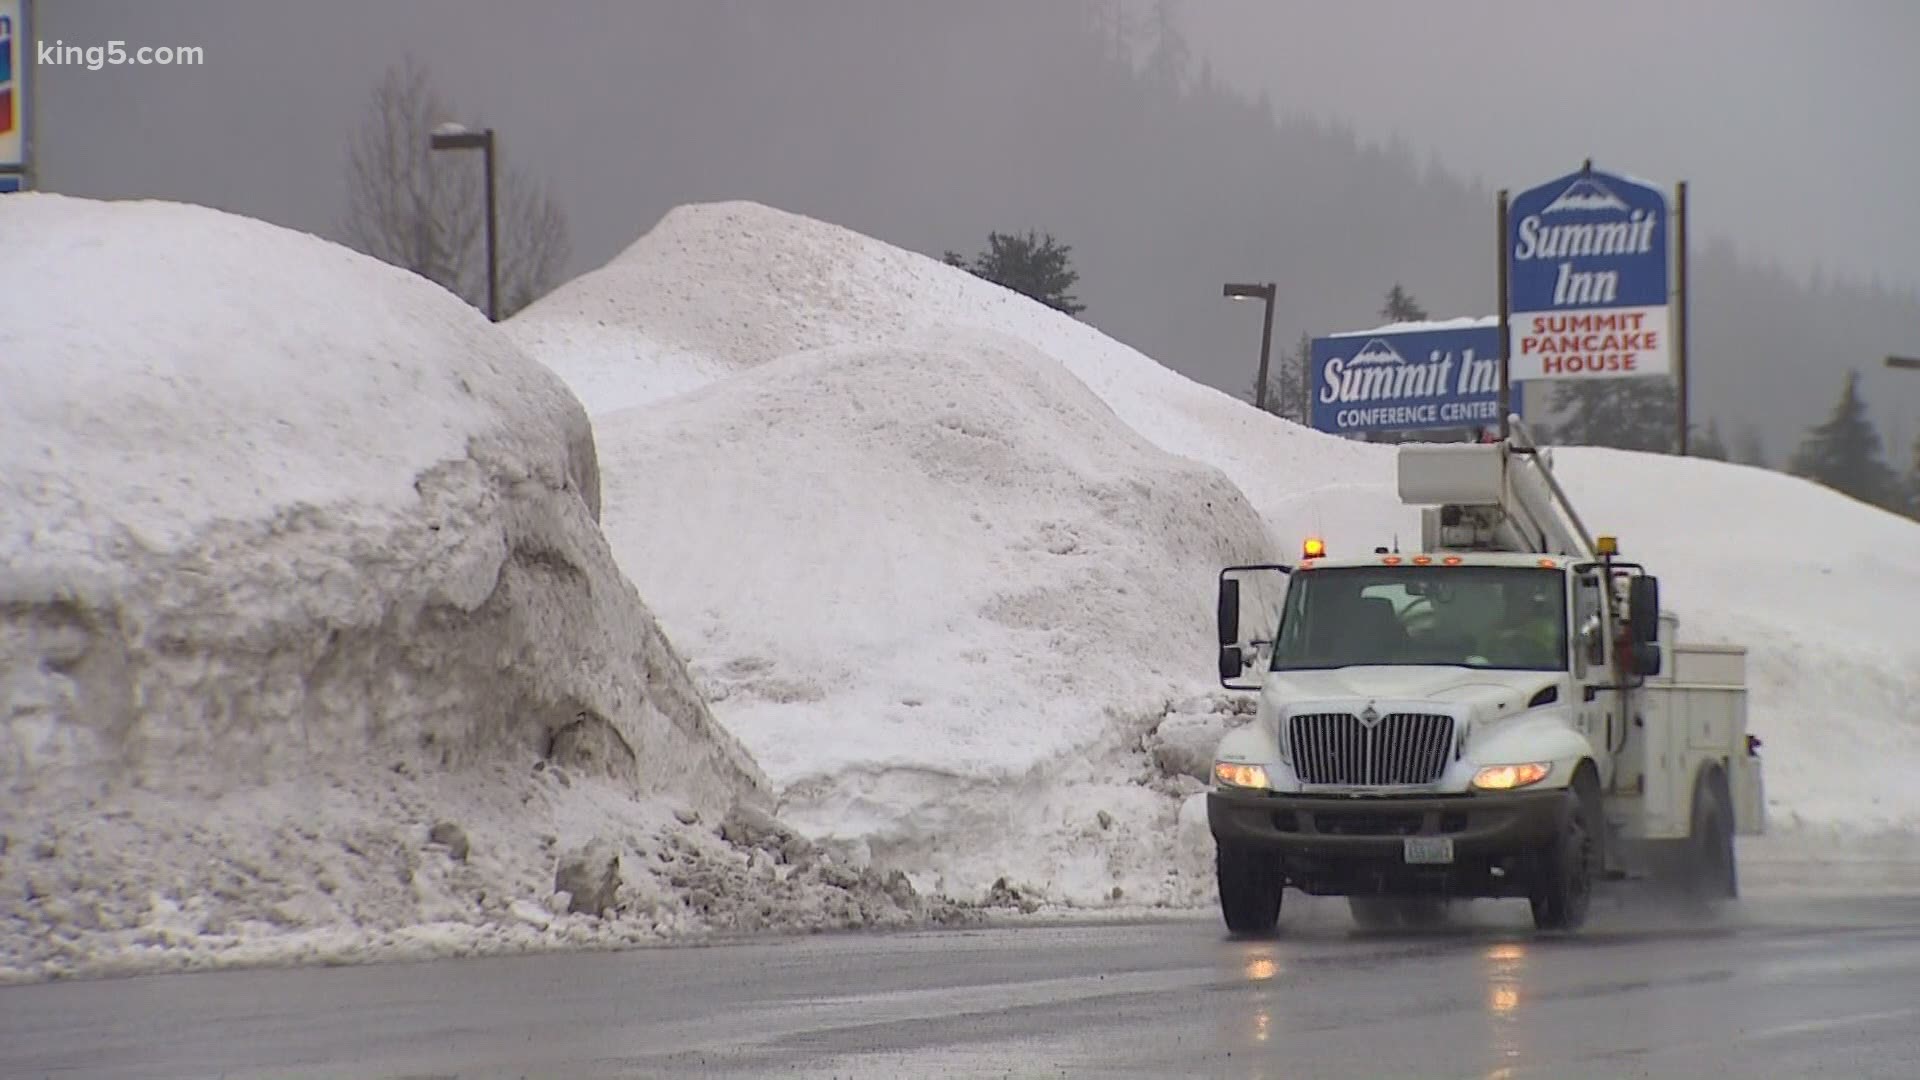 Unstable snowpack bringing warnings on avalanches in western Washington's mountain passes.